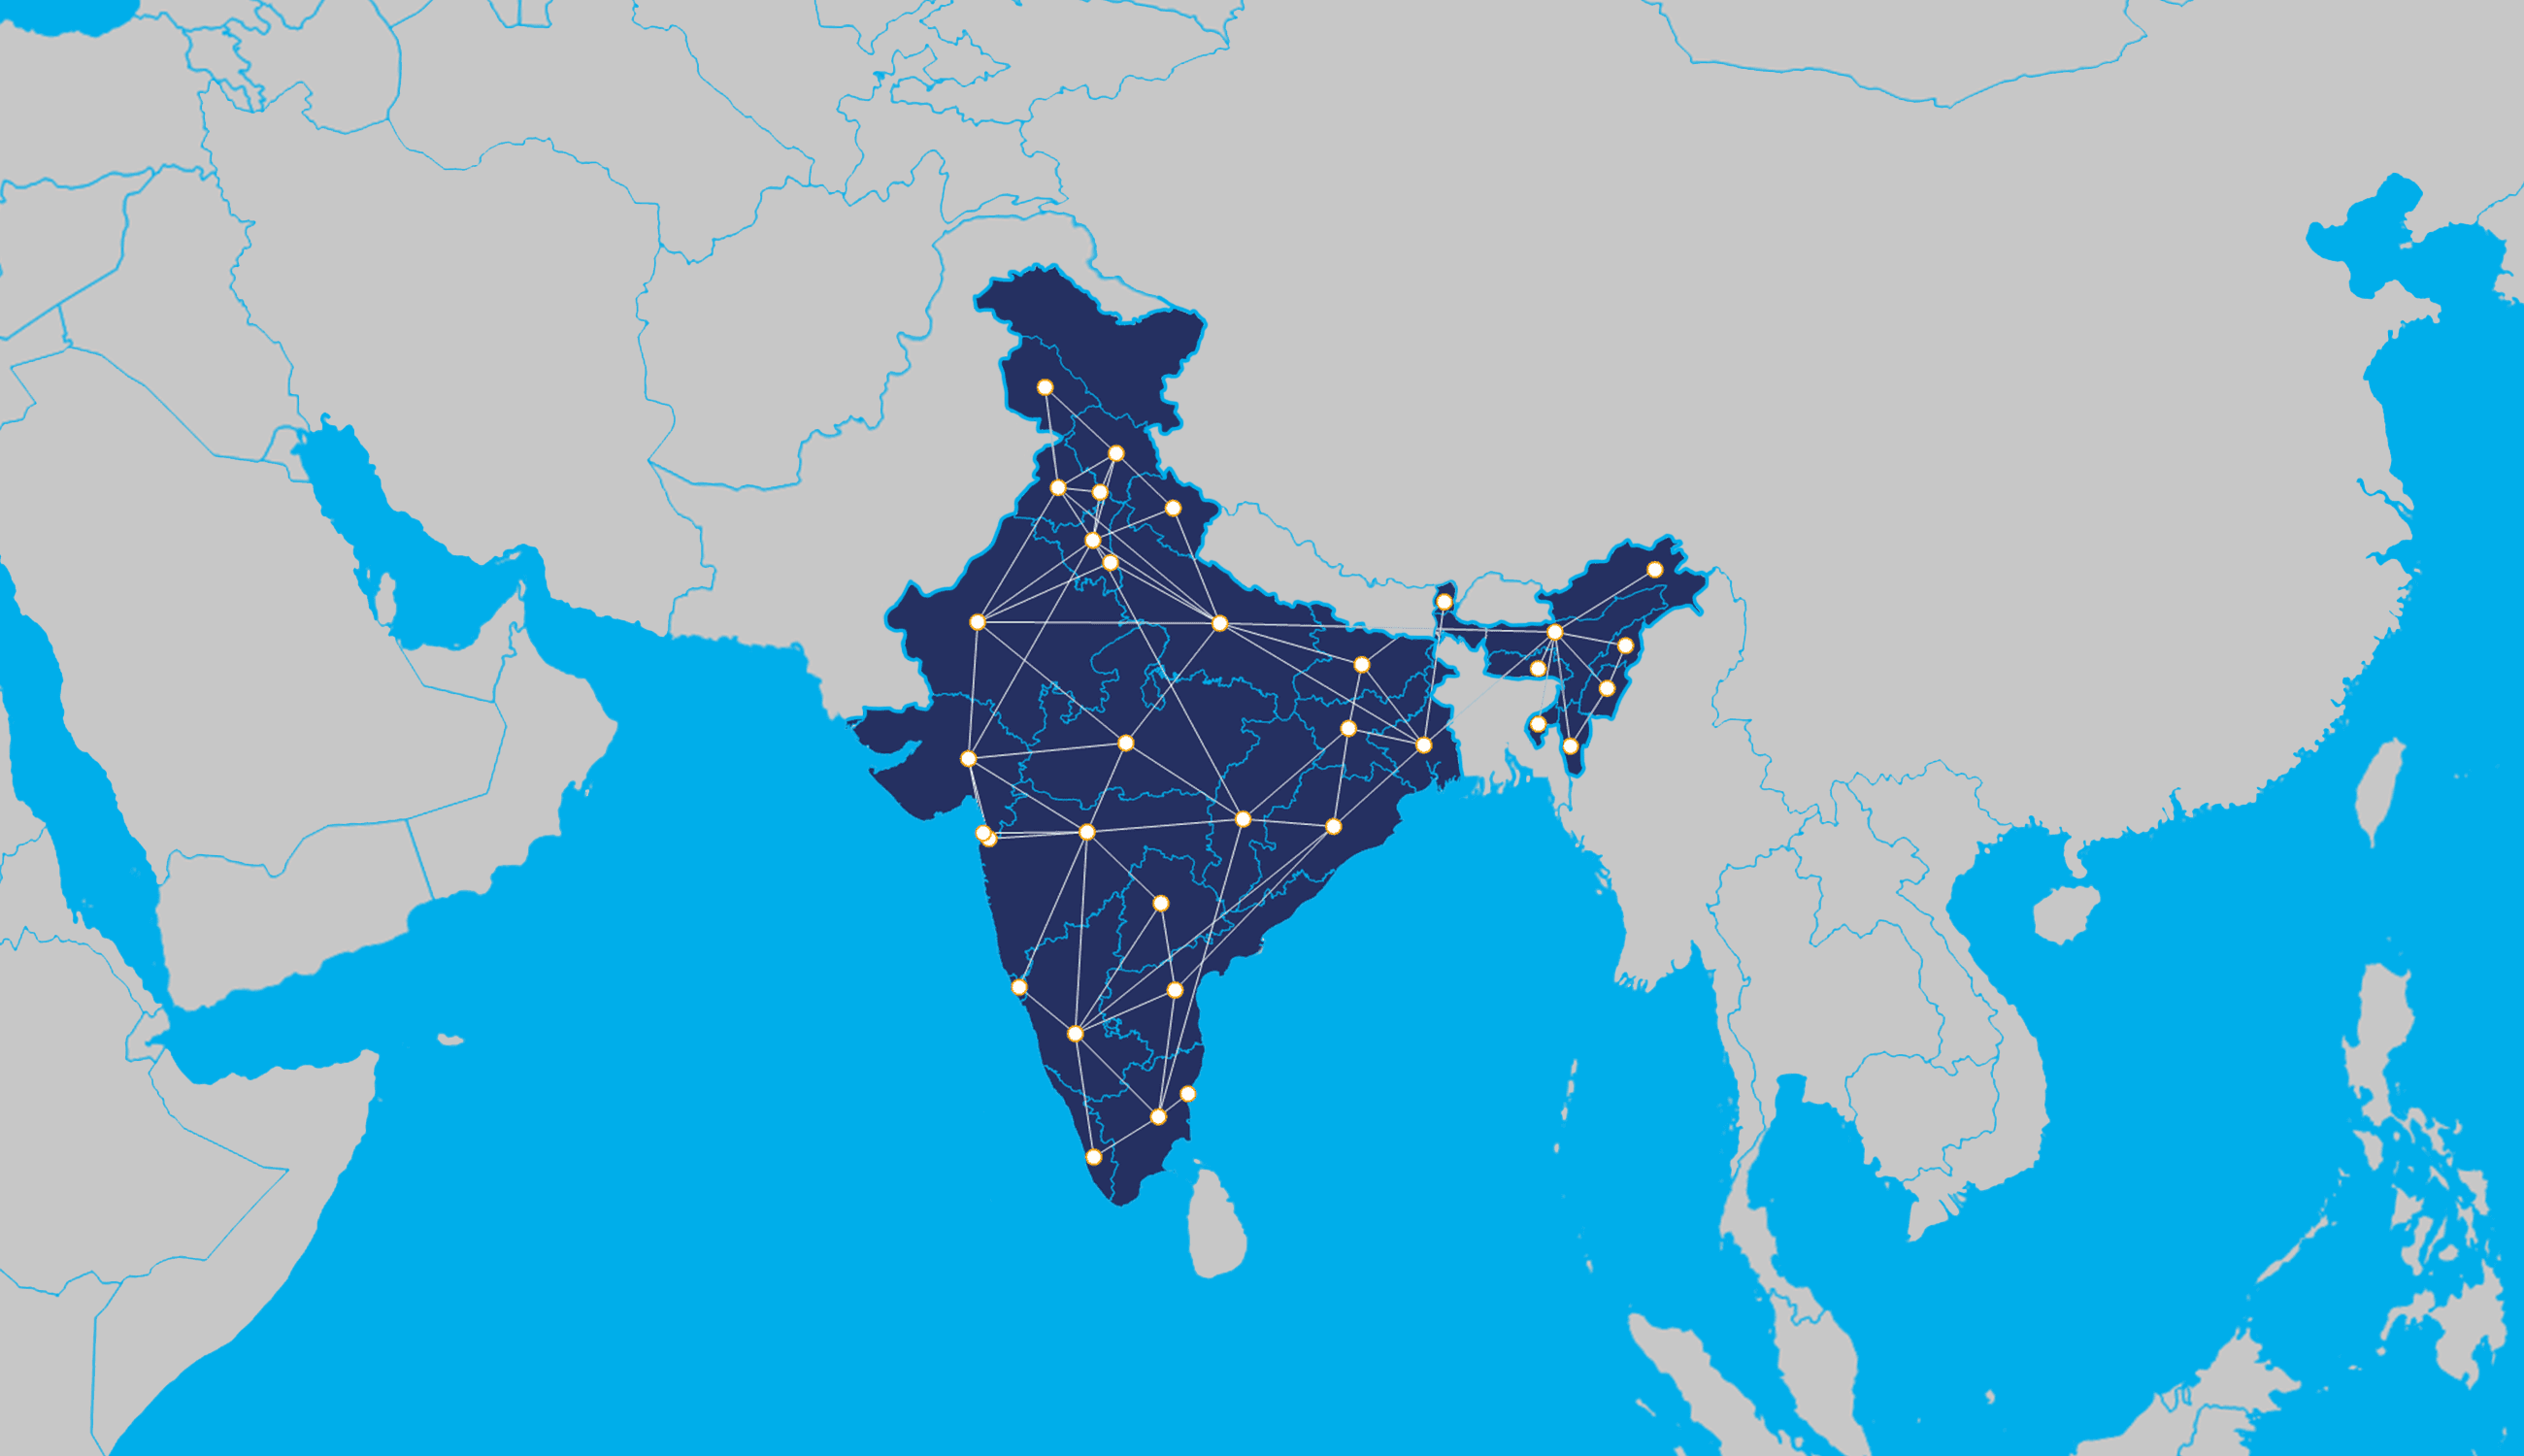 India with surrounding